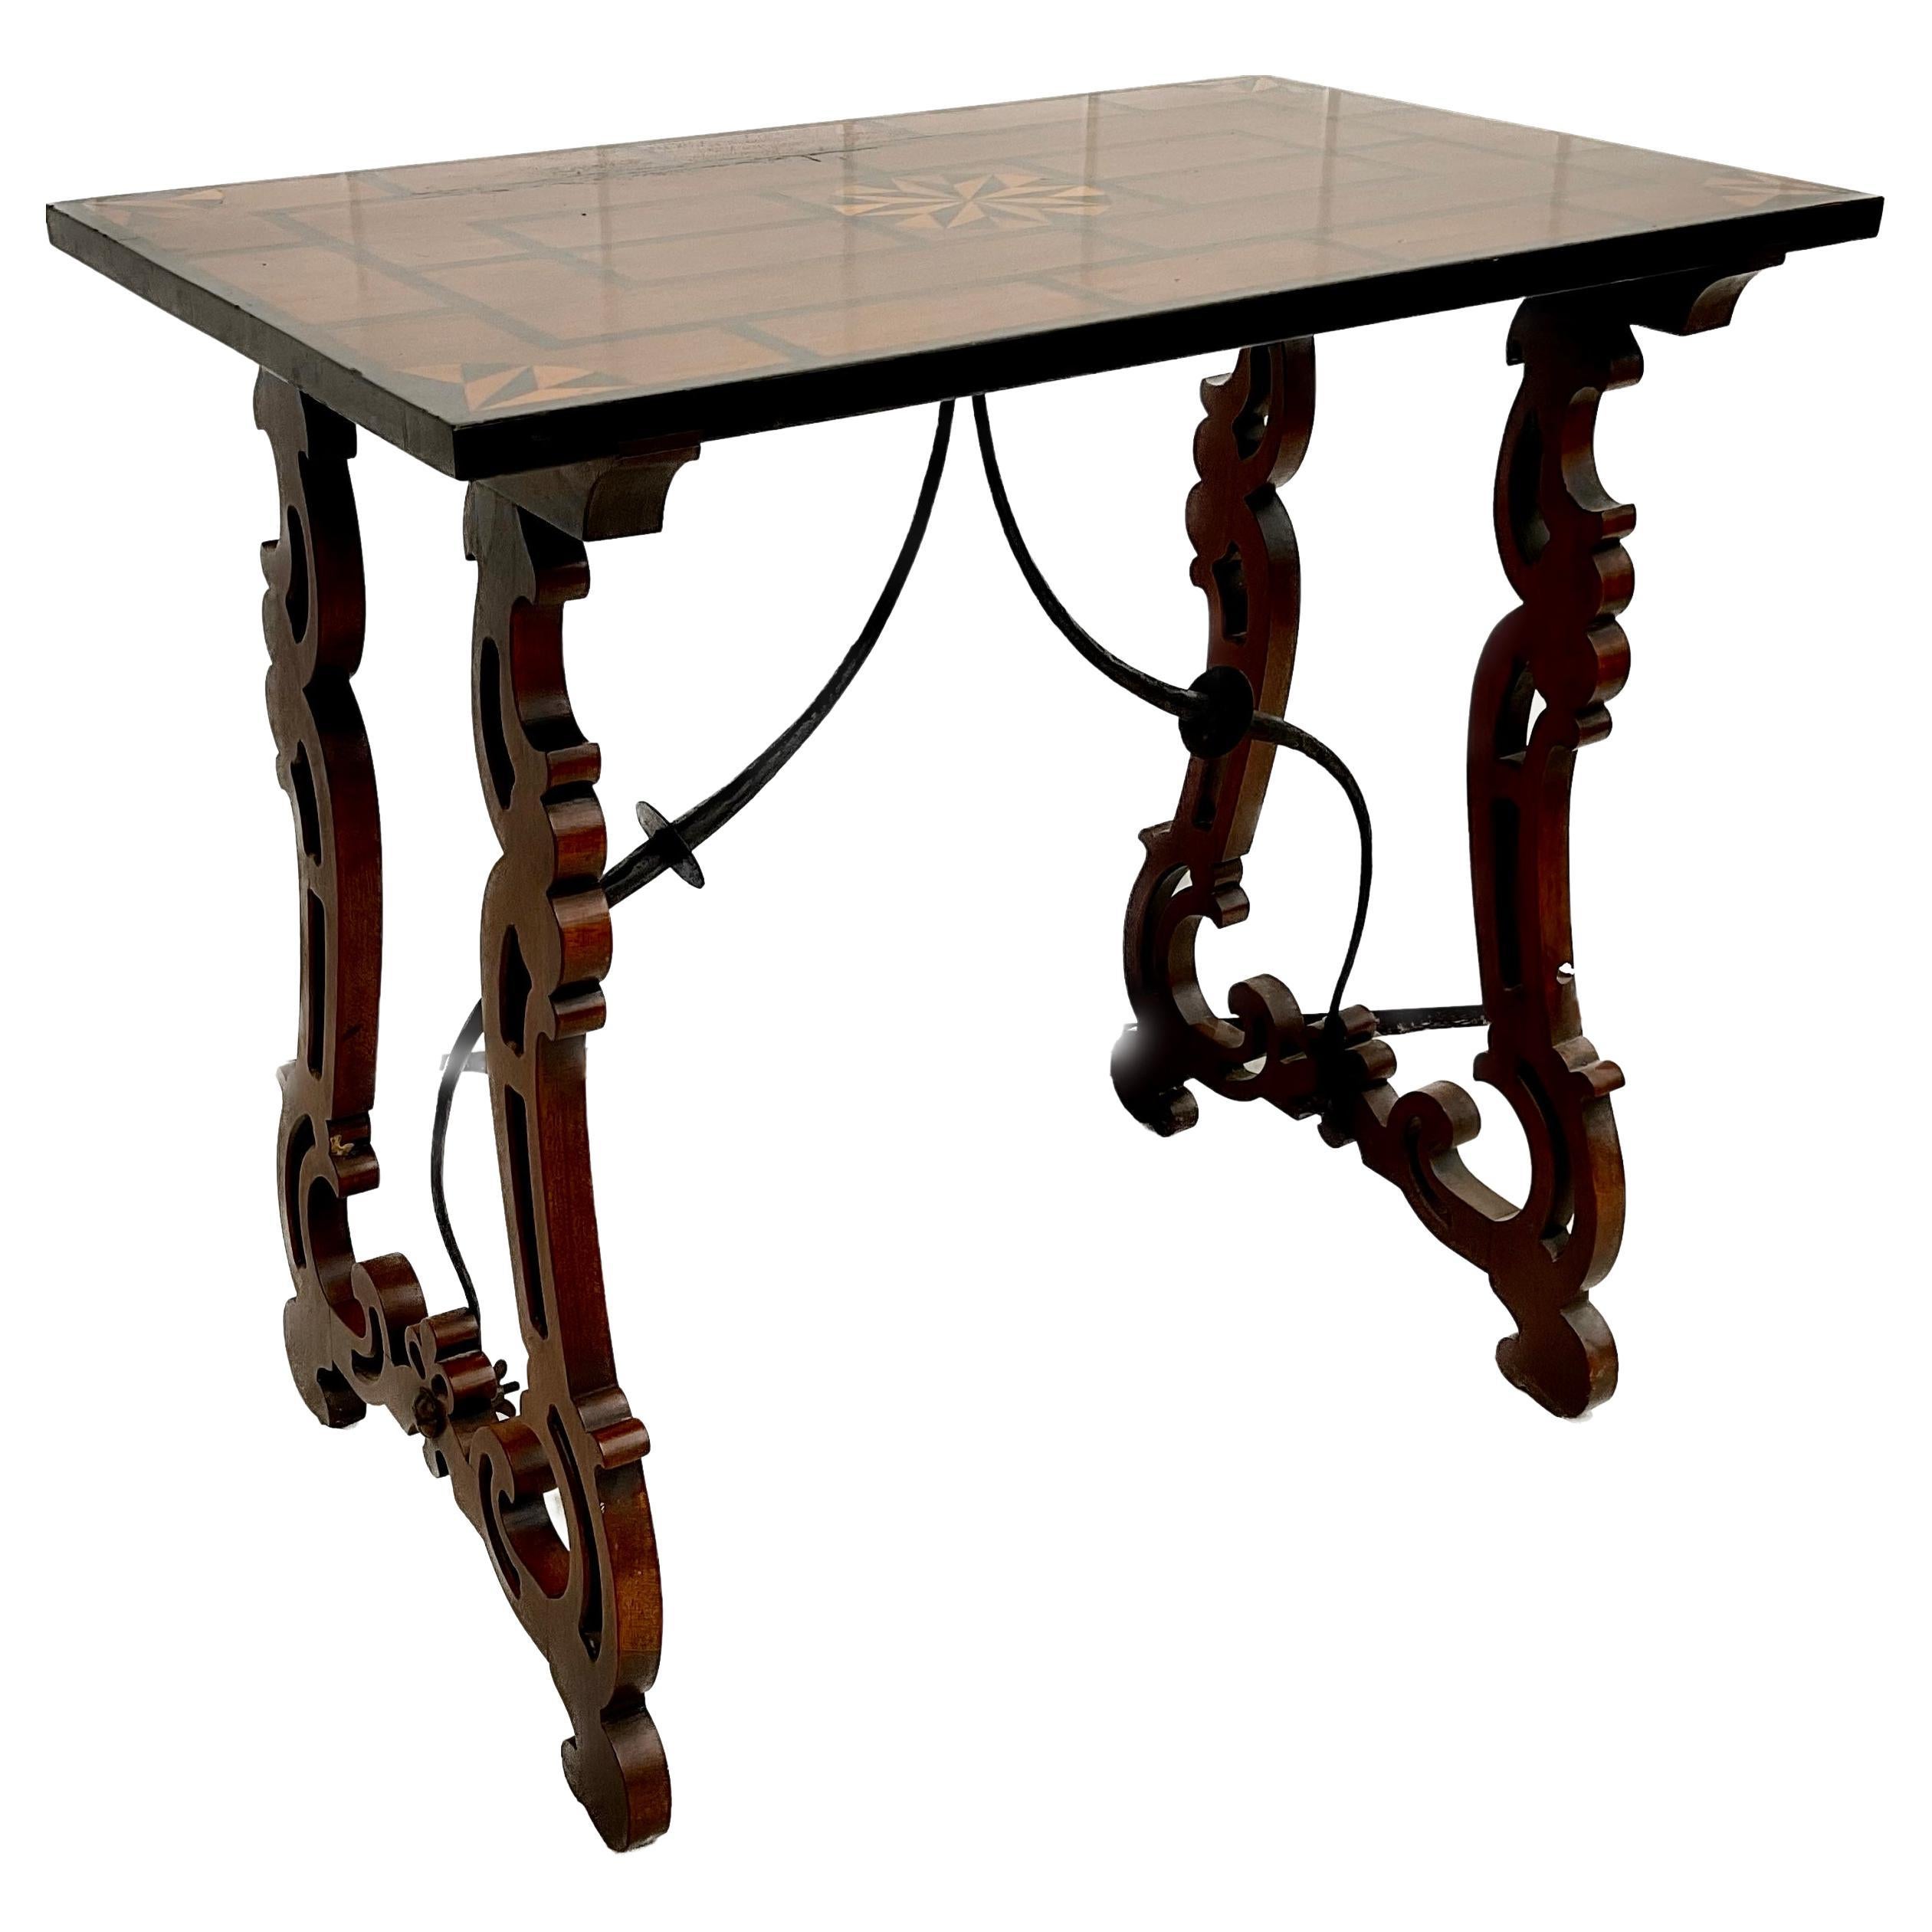 Inlaid Spanish Baroque trestle side table, the surface having geometric pattern marquetry & central medallion. With pierced lyre form legs joined by iron stretcher. 